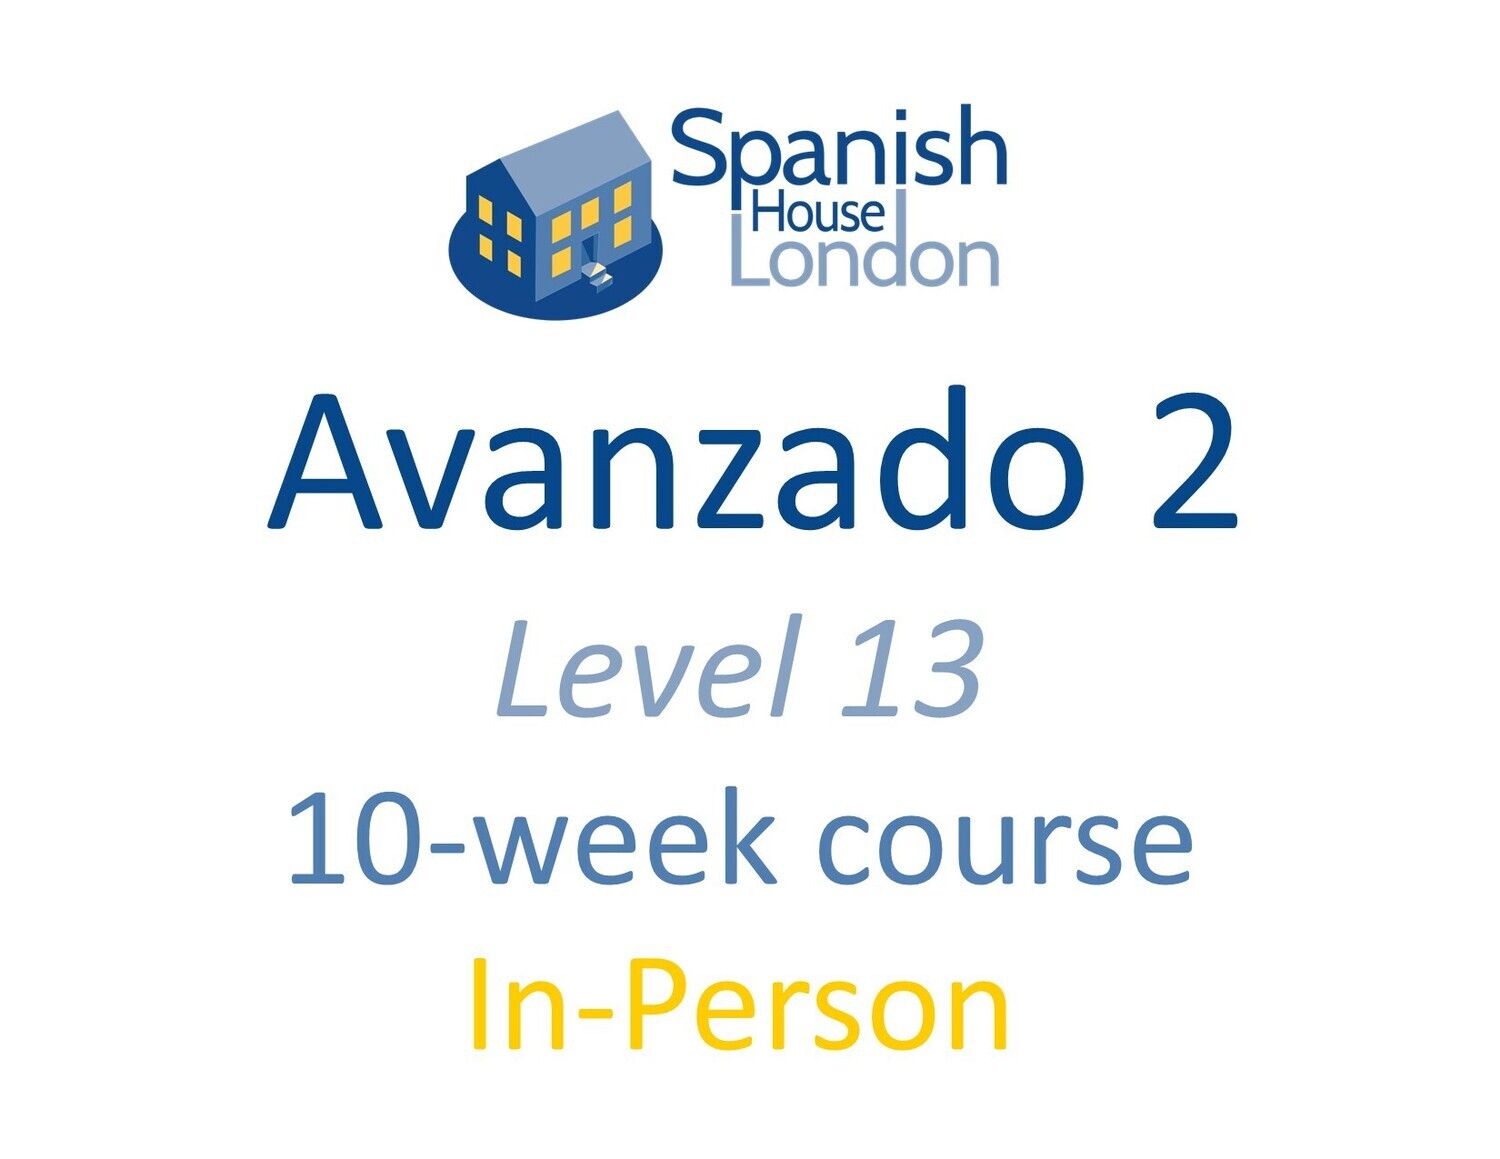 Avanzado 2 Course starting on 23rd January at 6pm in Clapham